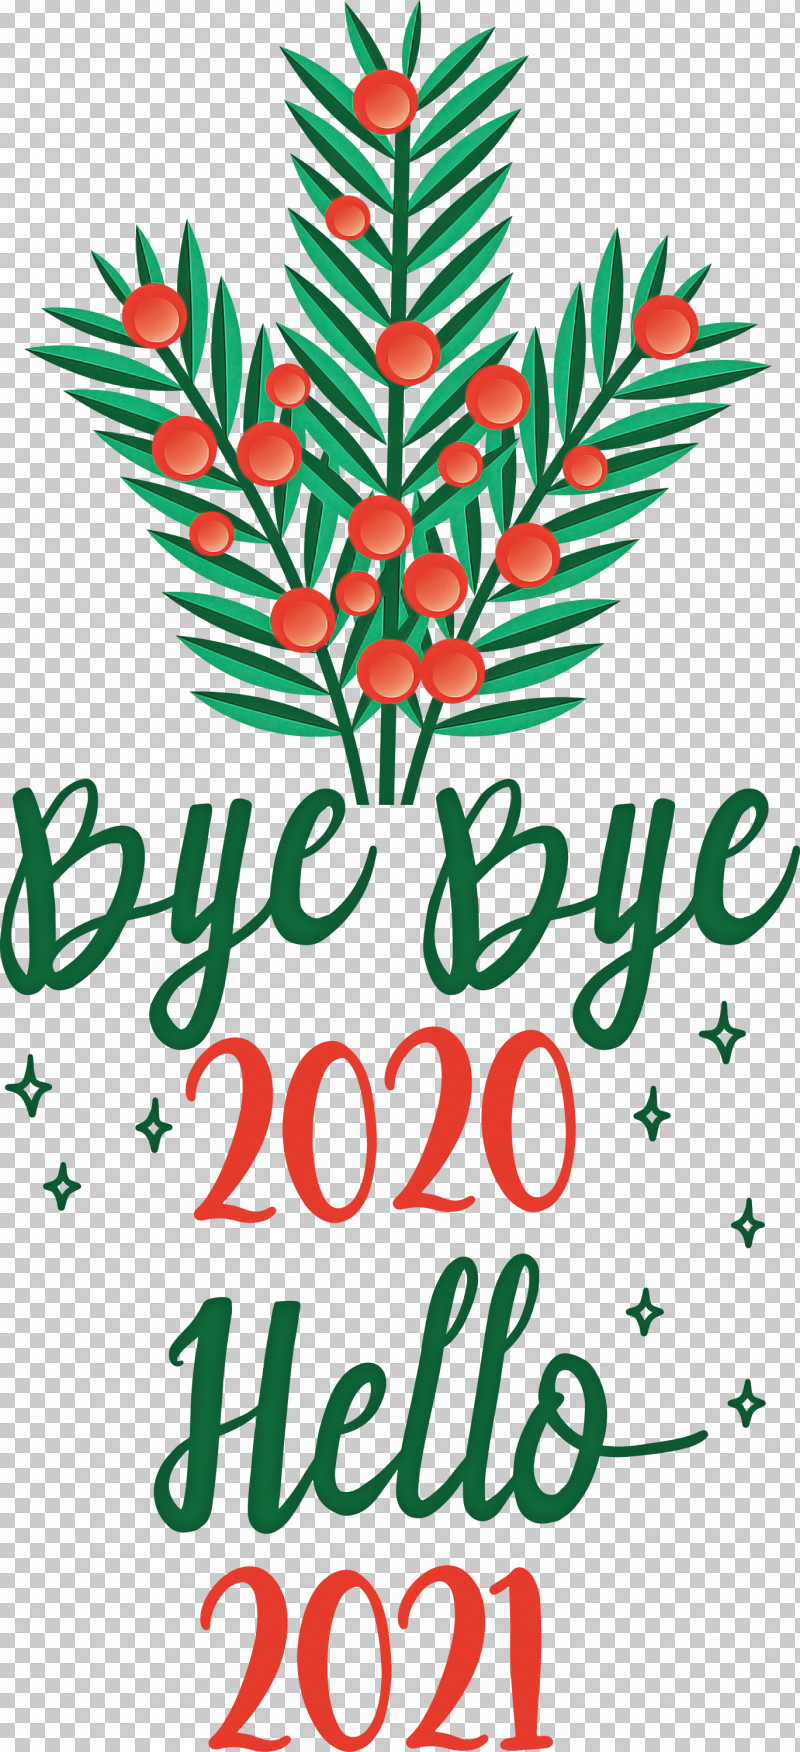 Hello 2021 Year Bye Bye 2020 Year PNG, Clipart, Bye Bye 2020 Year, Christmas Day, Christmas Ornament, Christmas Ornament M, Christmas Tree Free PNG Download